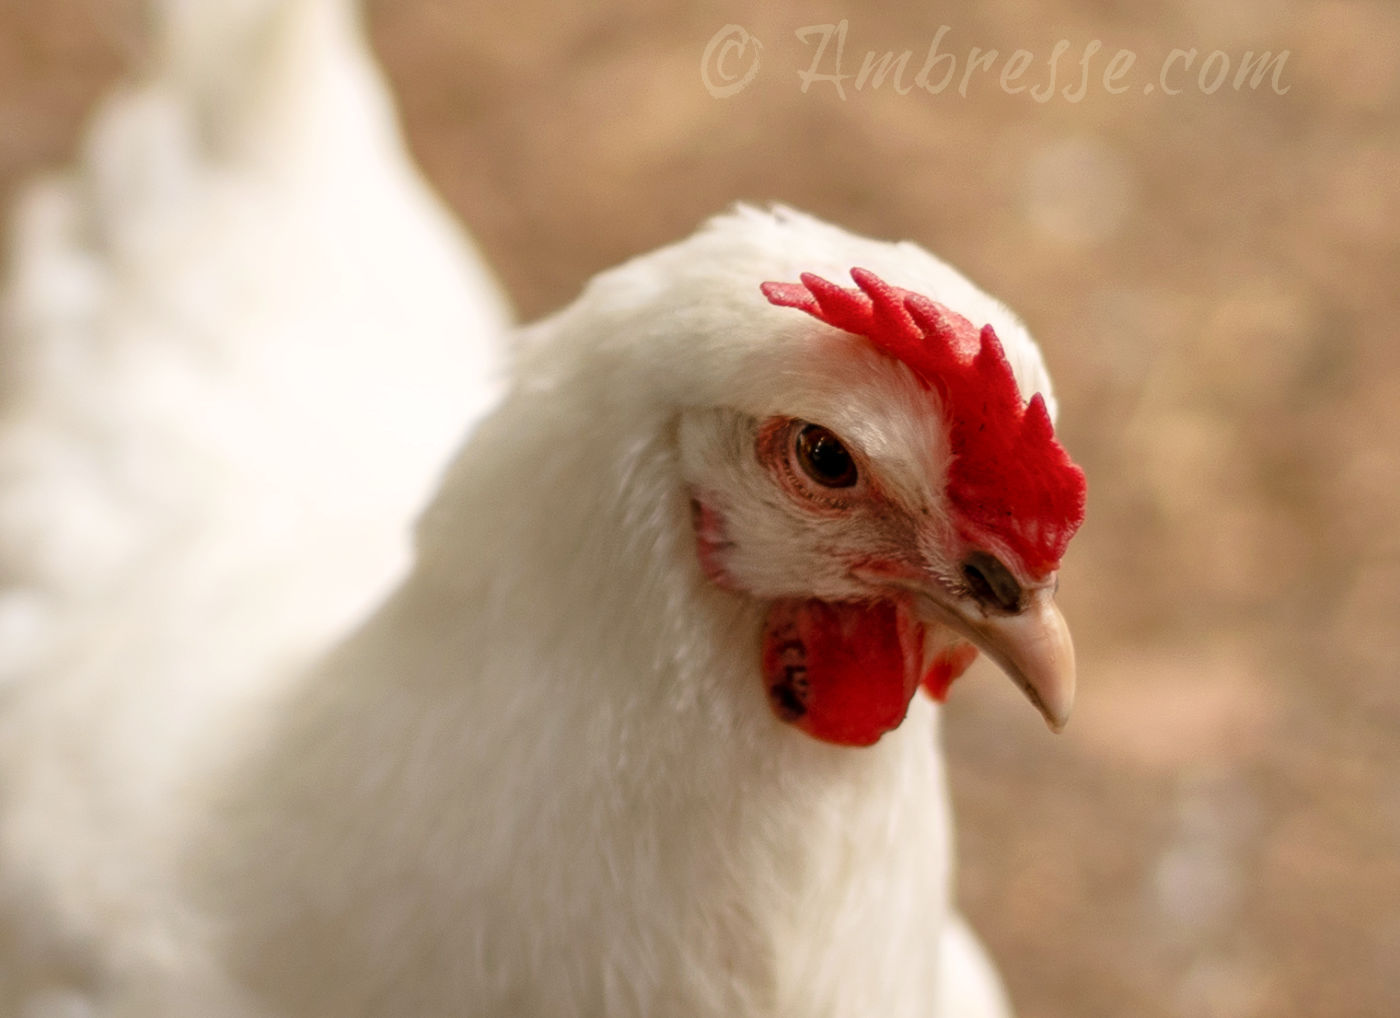 This American Bresse hen is happy you've found Ambresse.com!